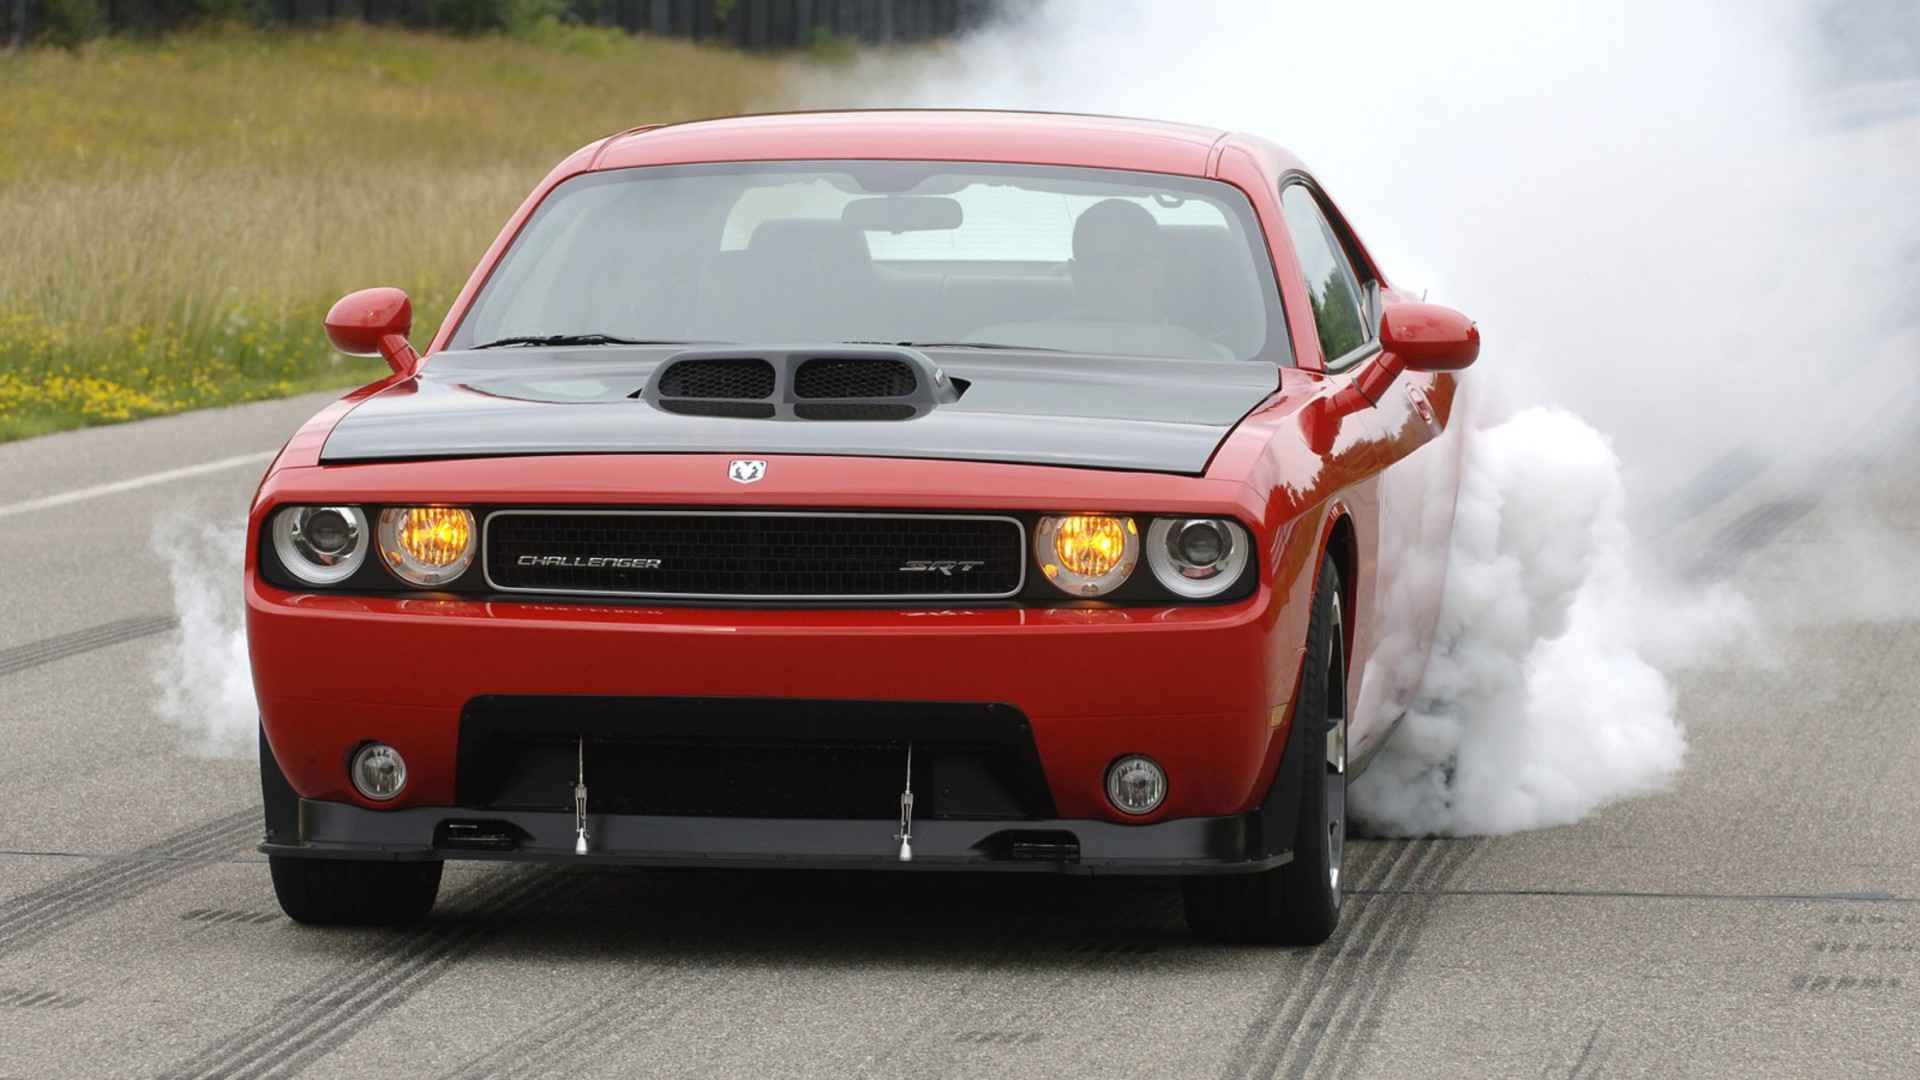 Red Cars Muscle Car Muscle Cars Scoop Burnout Vehicle American Cars Dodge Dodge Challenger Dodge Cha 1920x1080